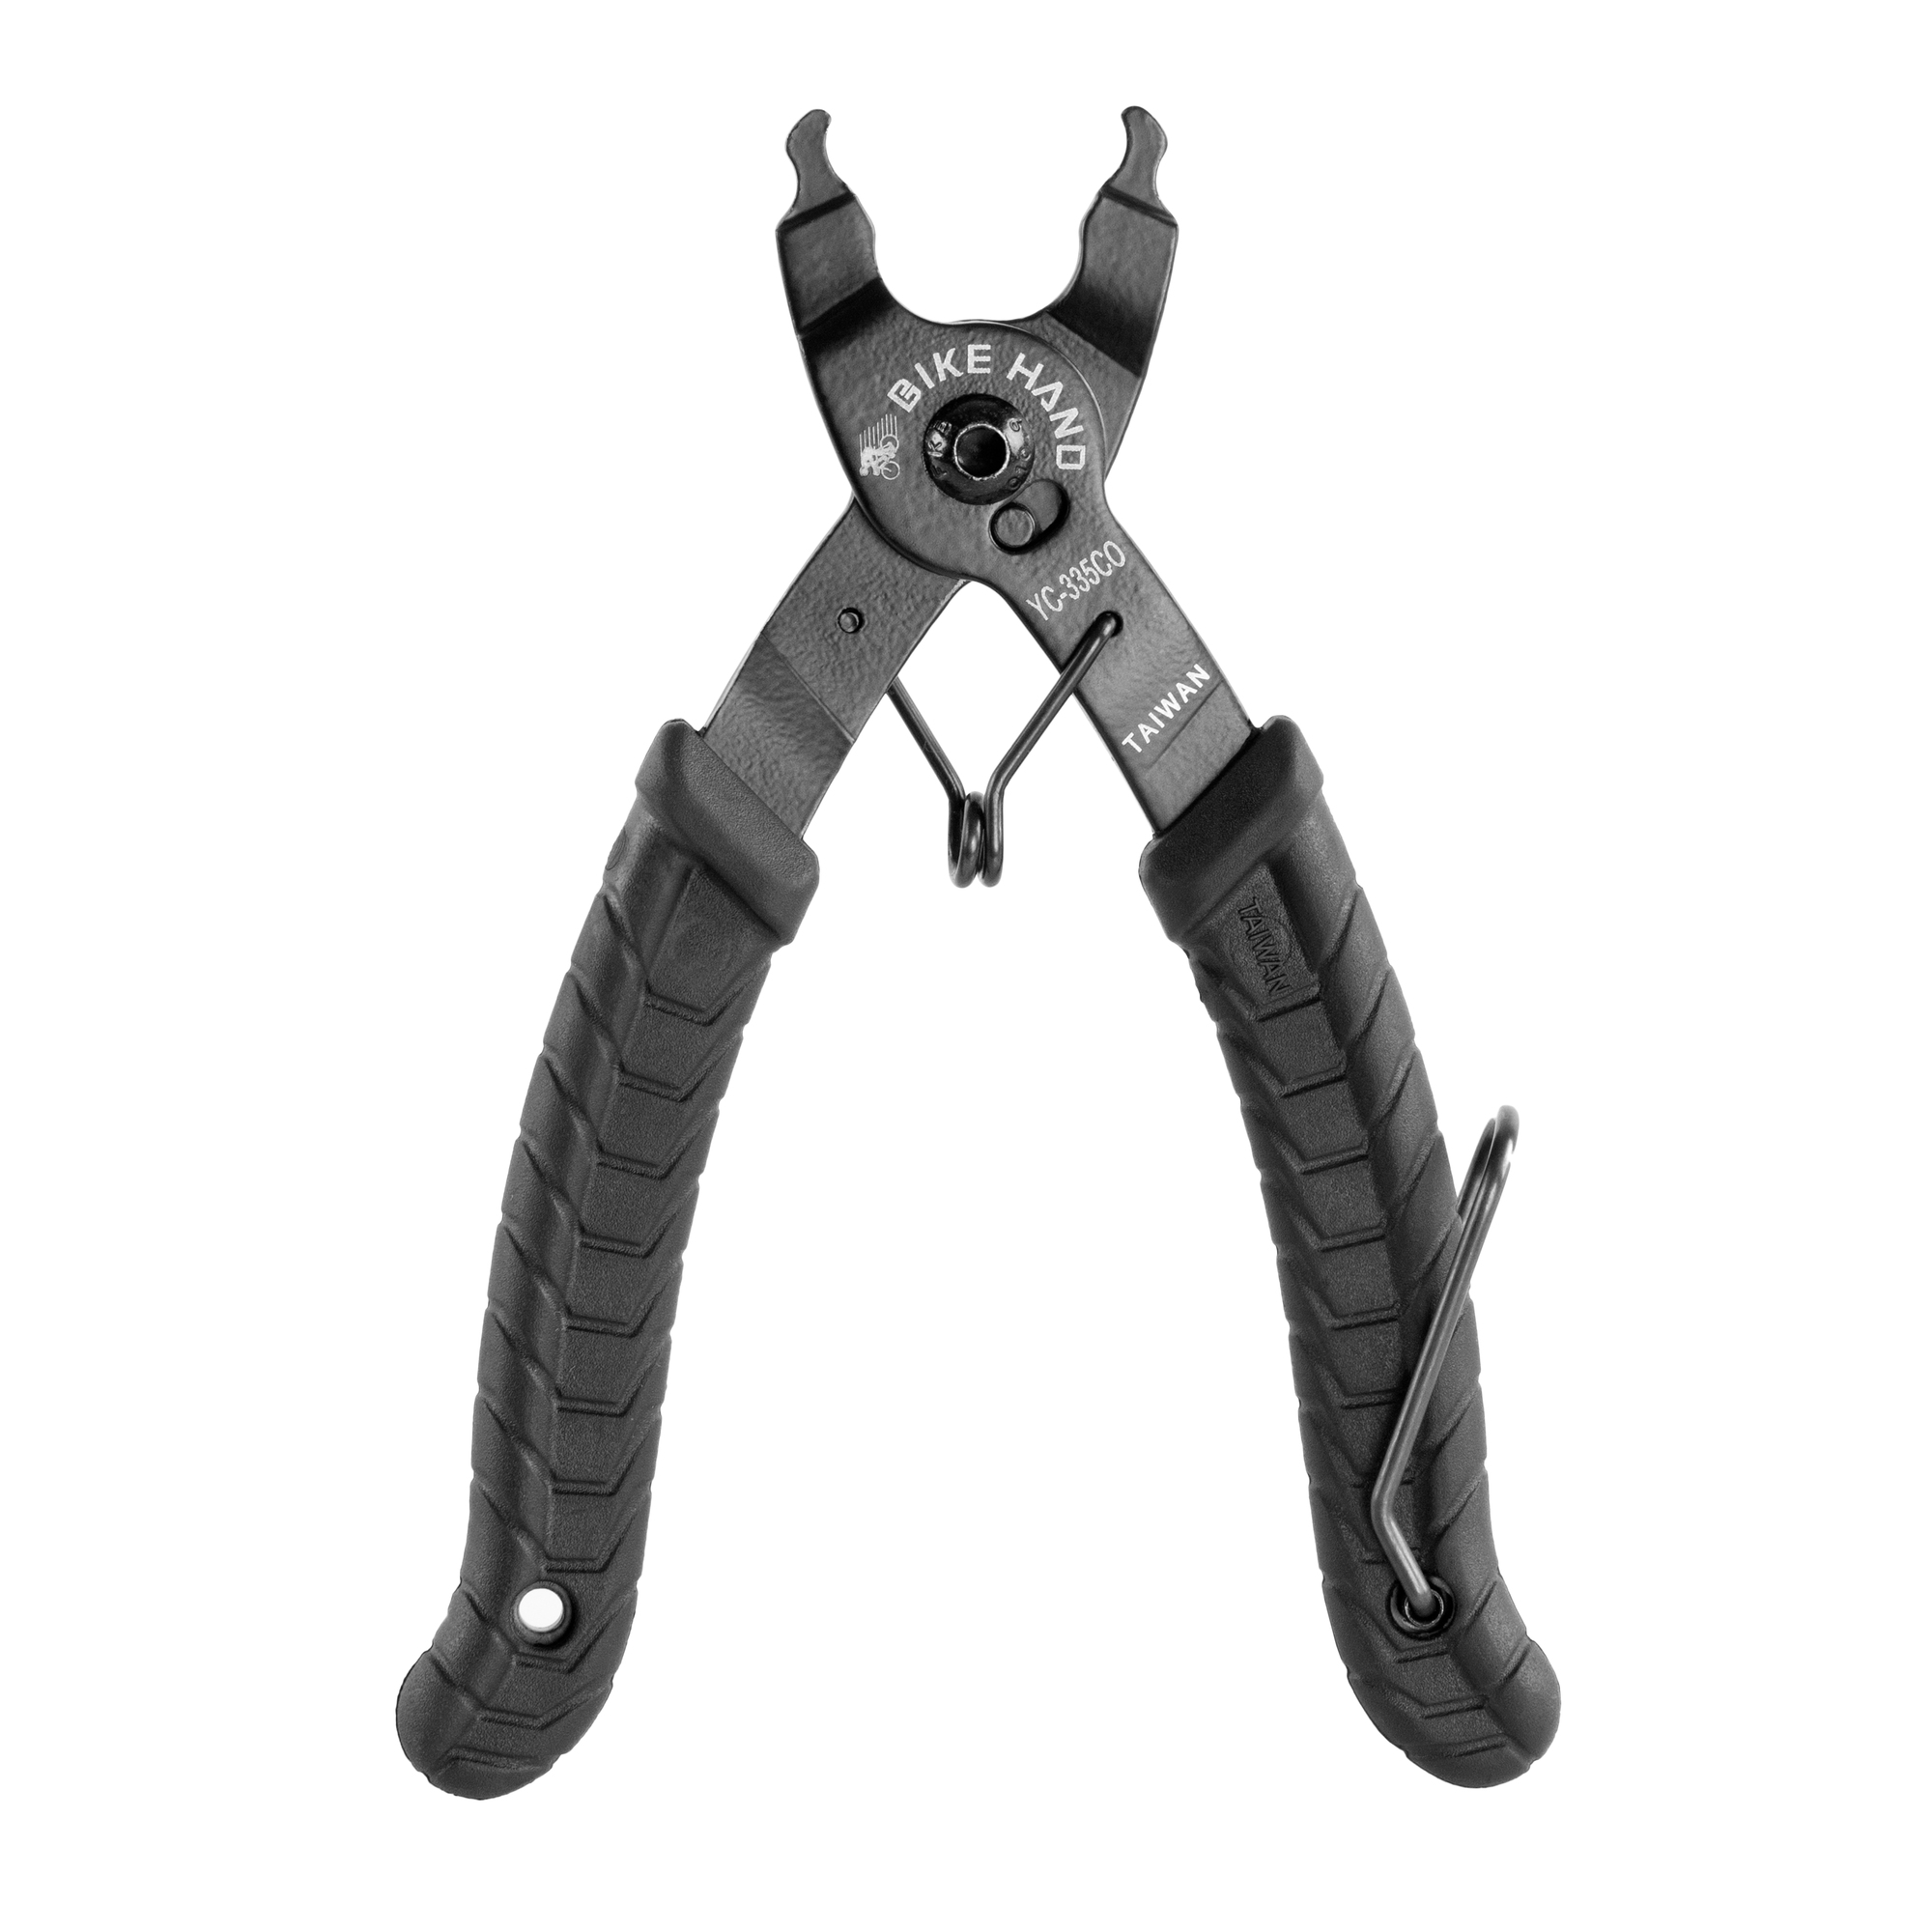 BIKEHAND Master Link Pliers Bike Chain Connect Removal Tool vs Park Tool 